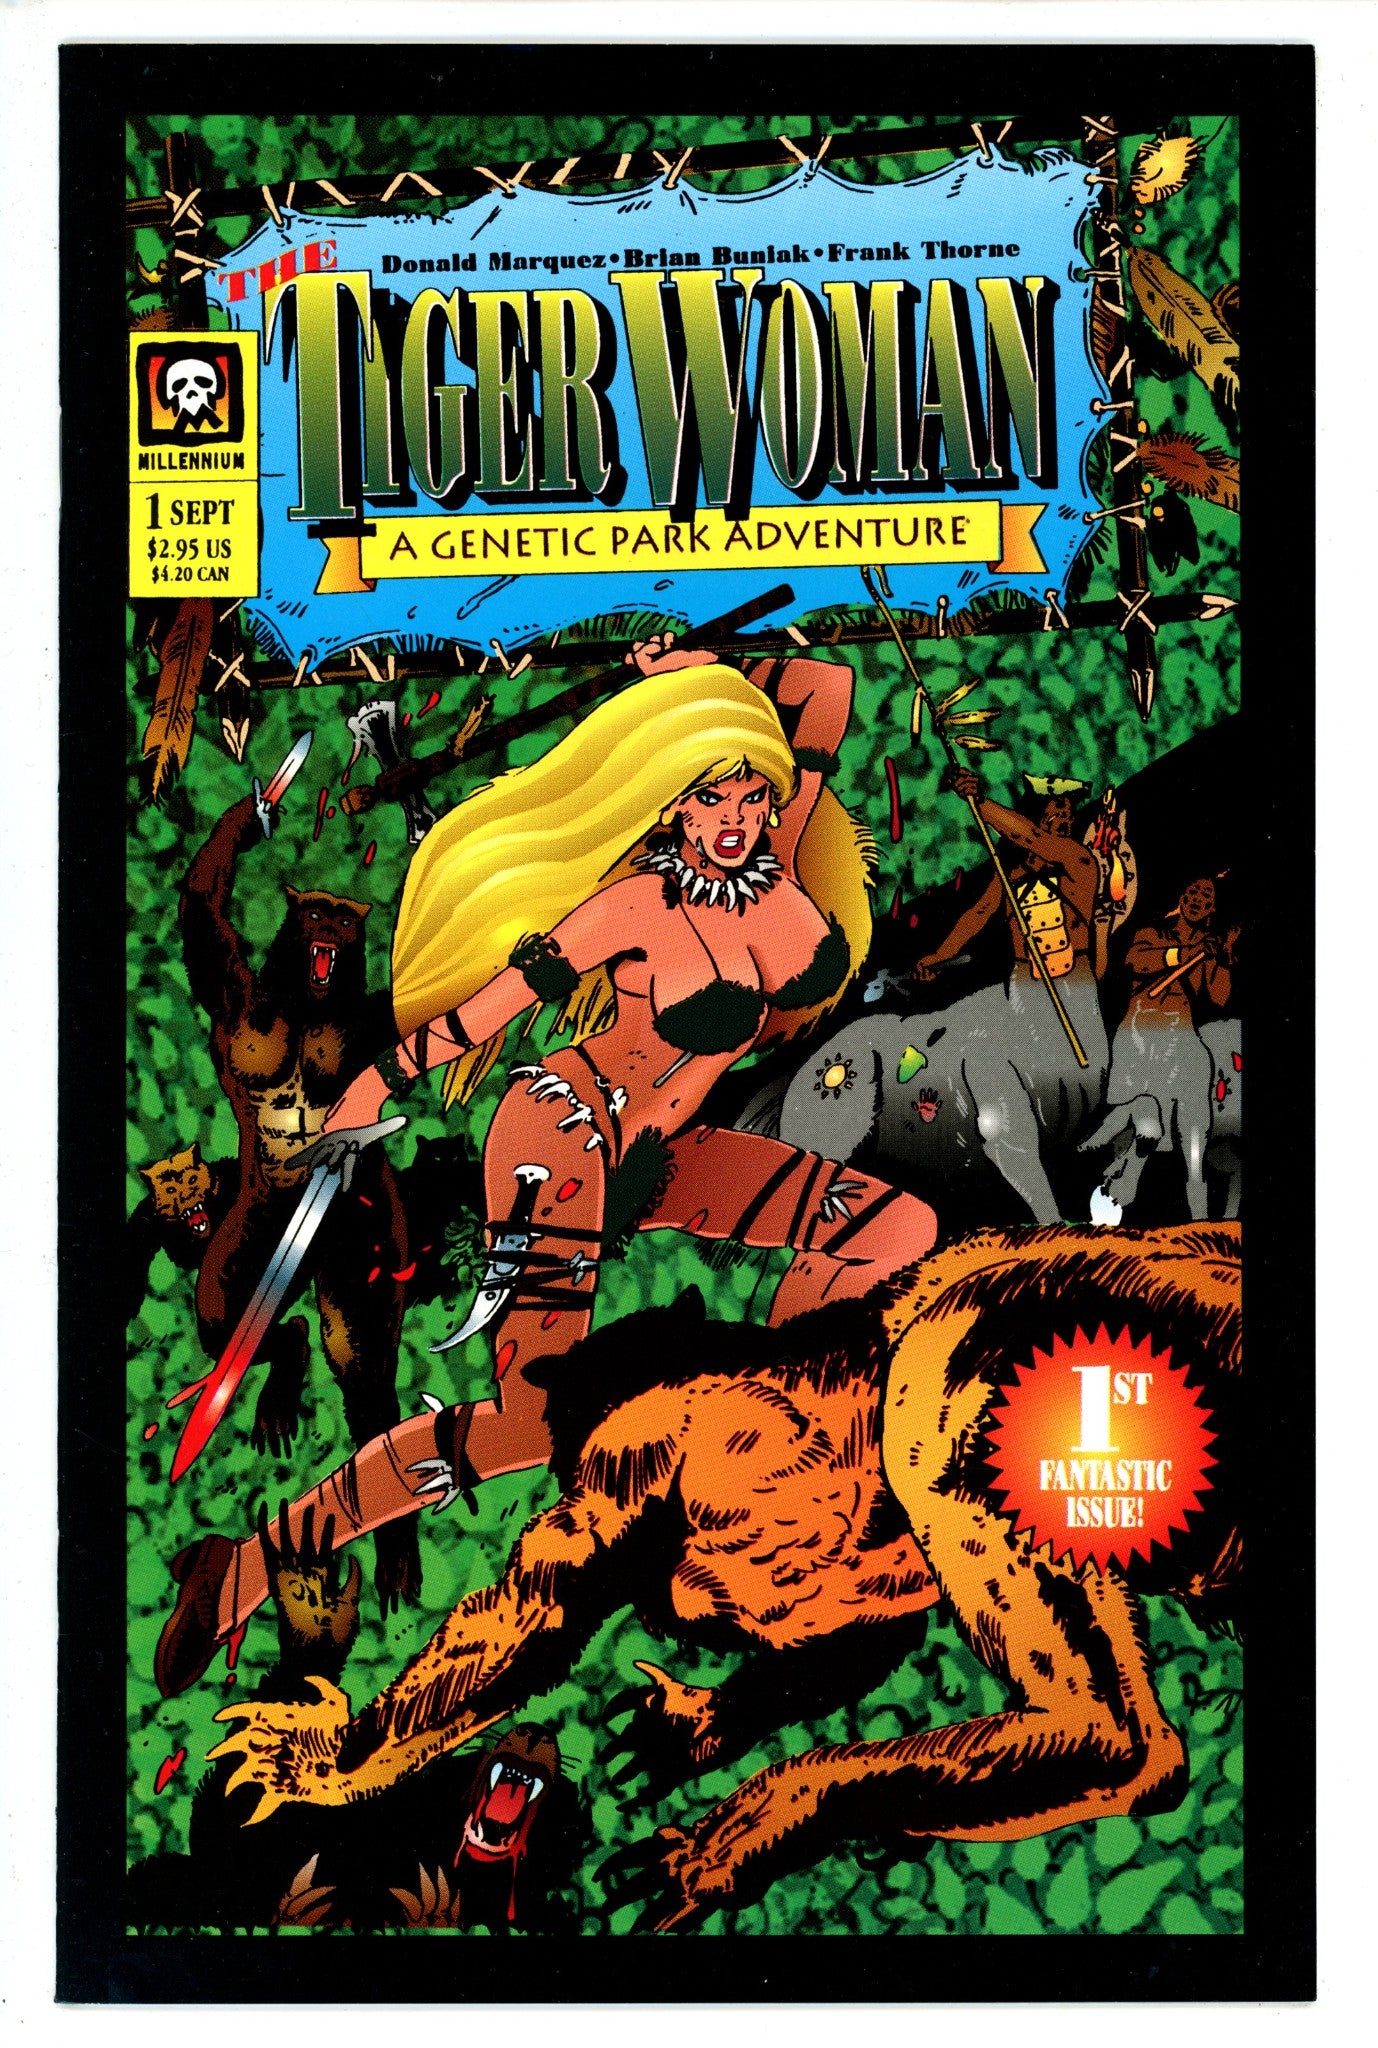 The Tiger Woman 1 (1994)